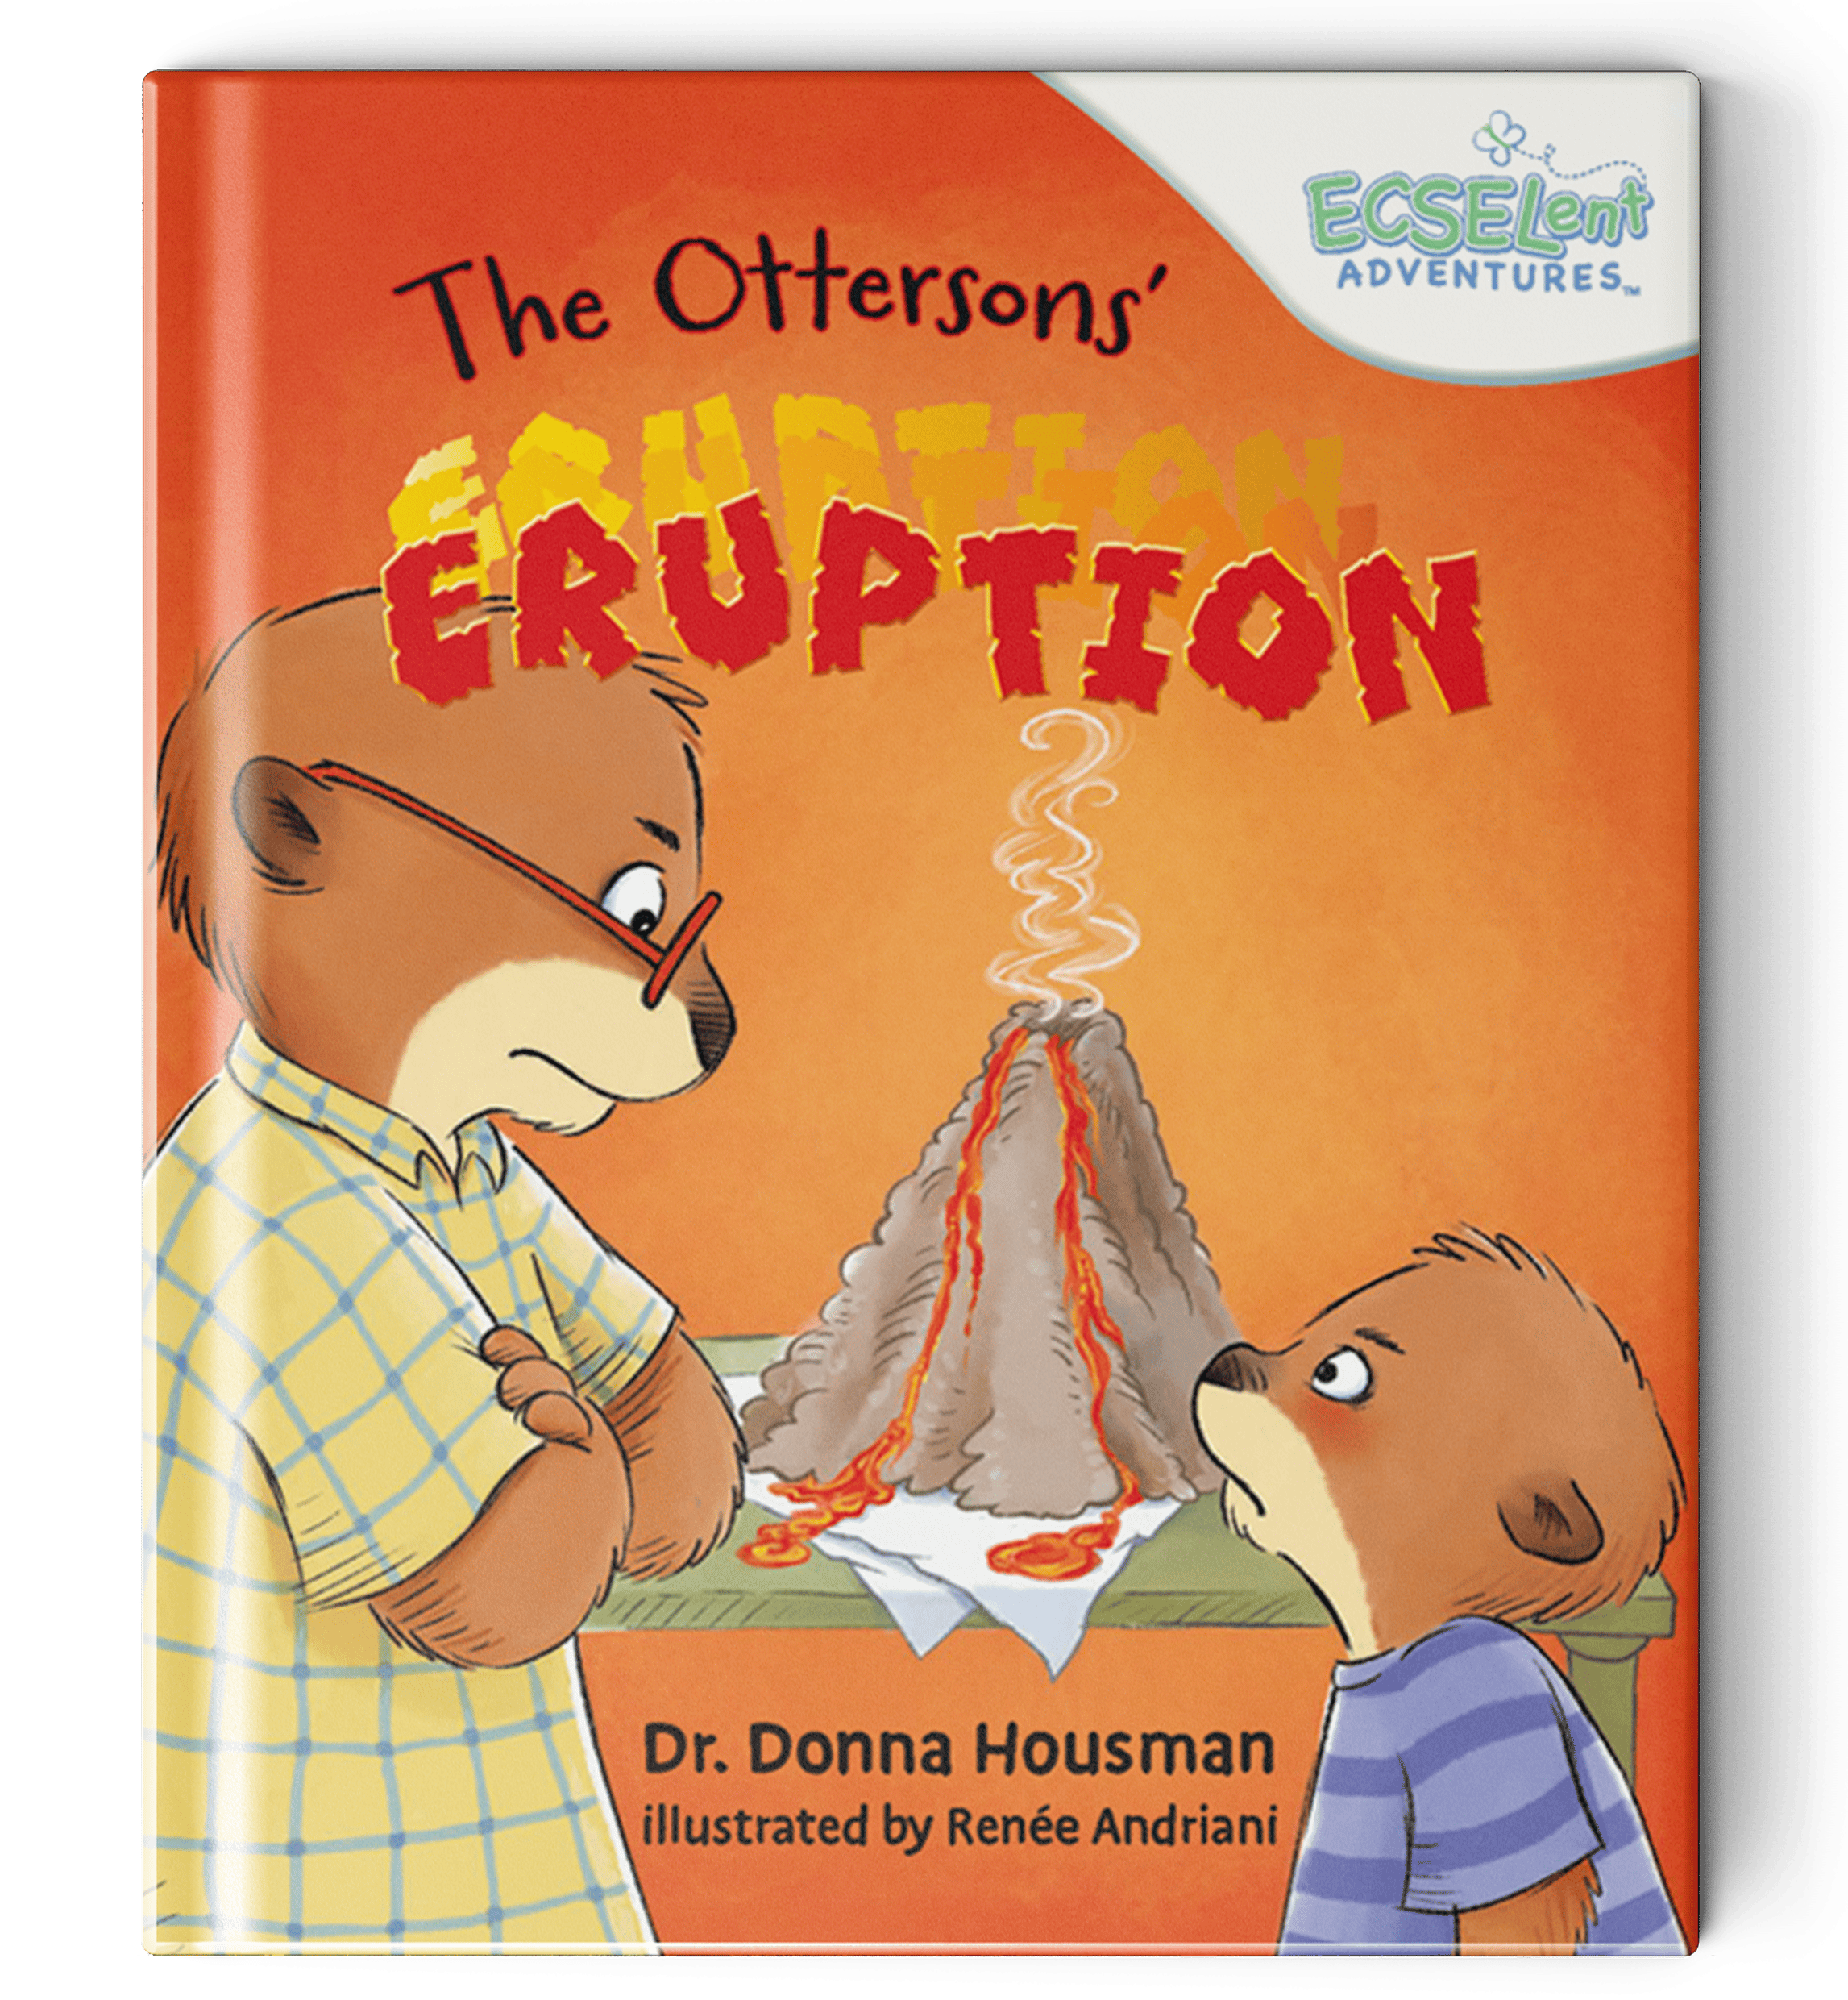 The Ottersons' Eruption